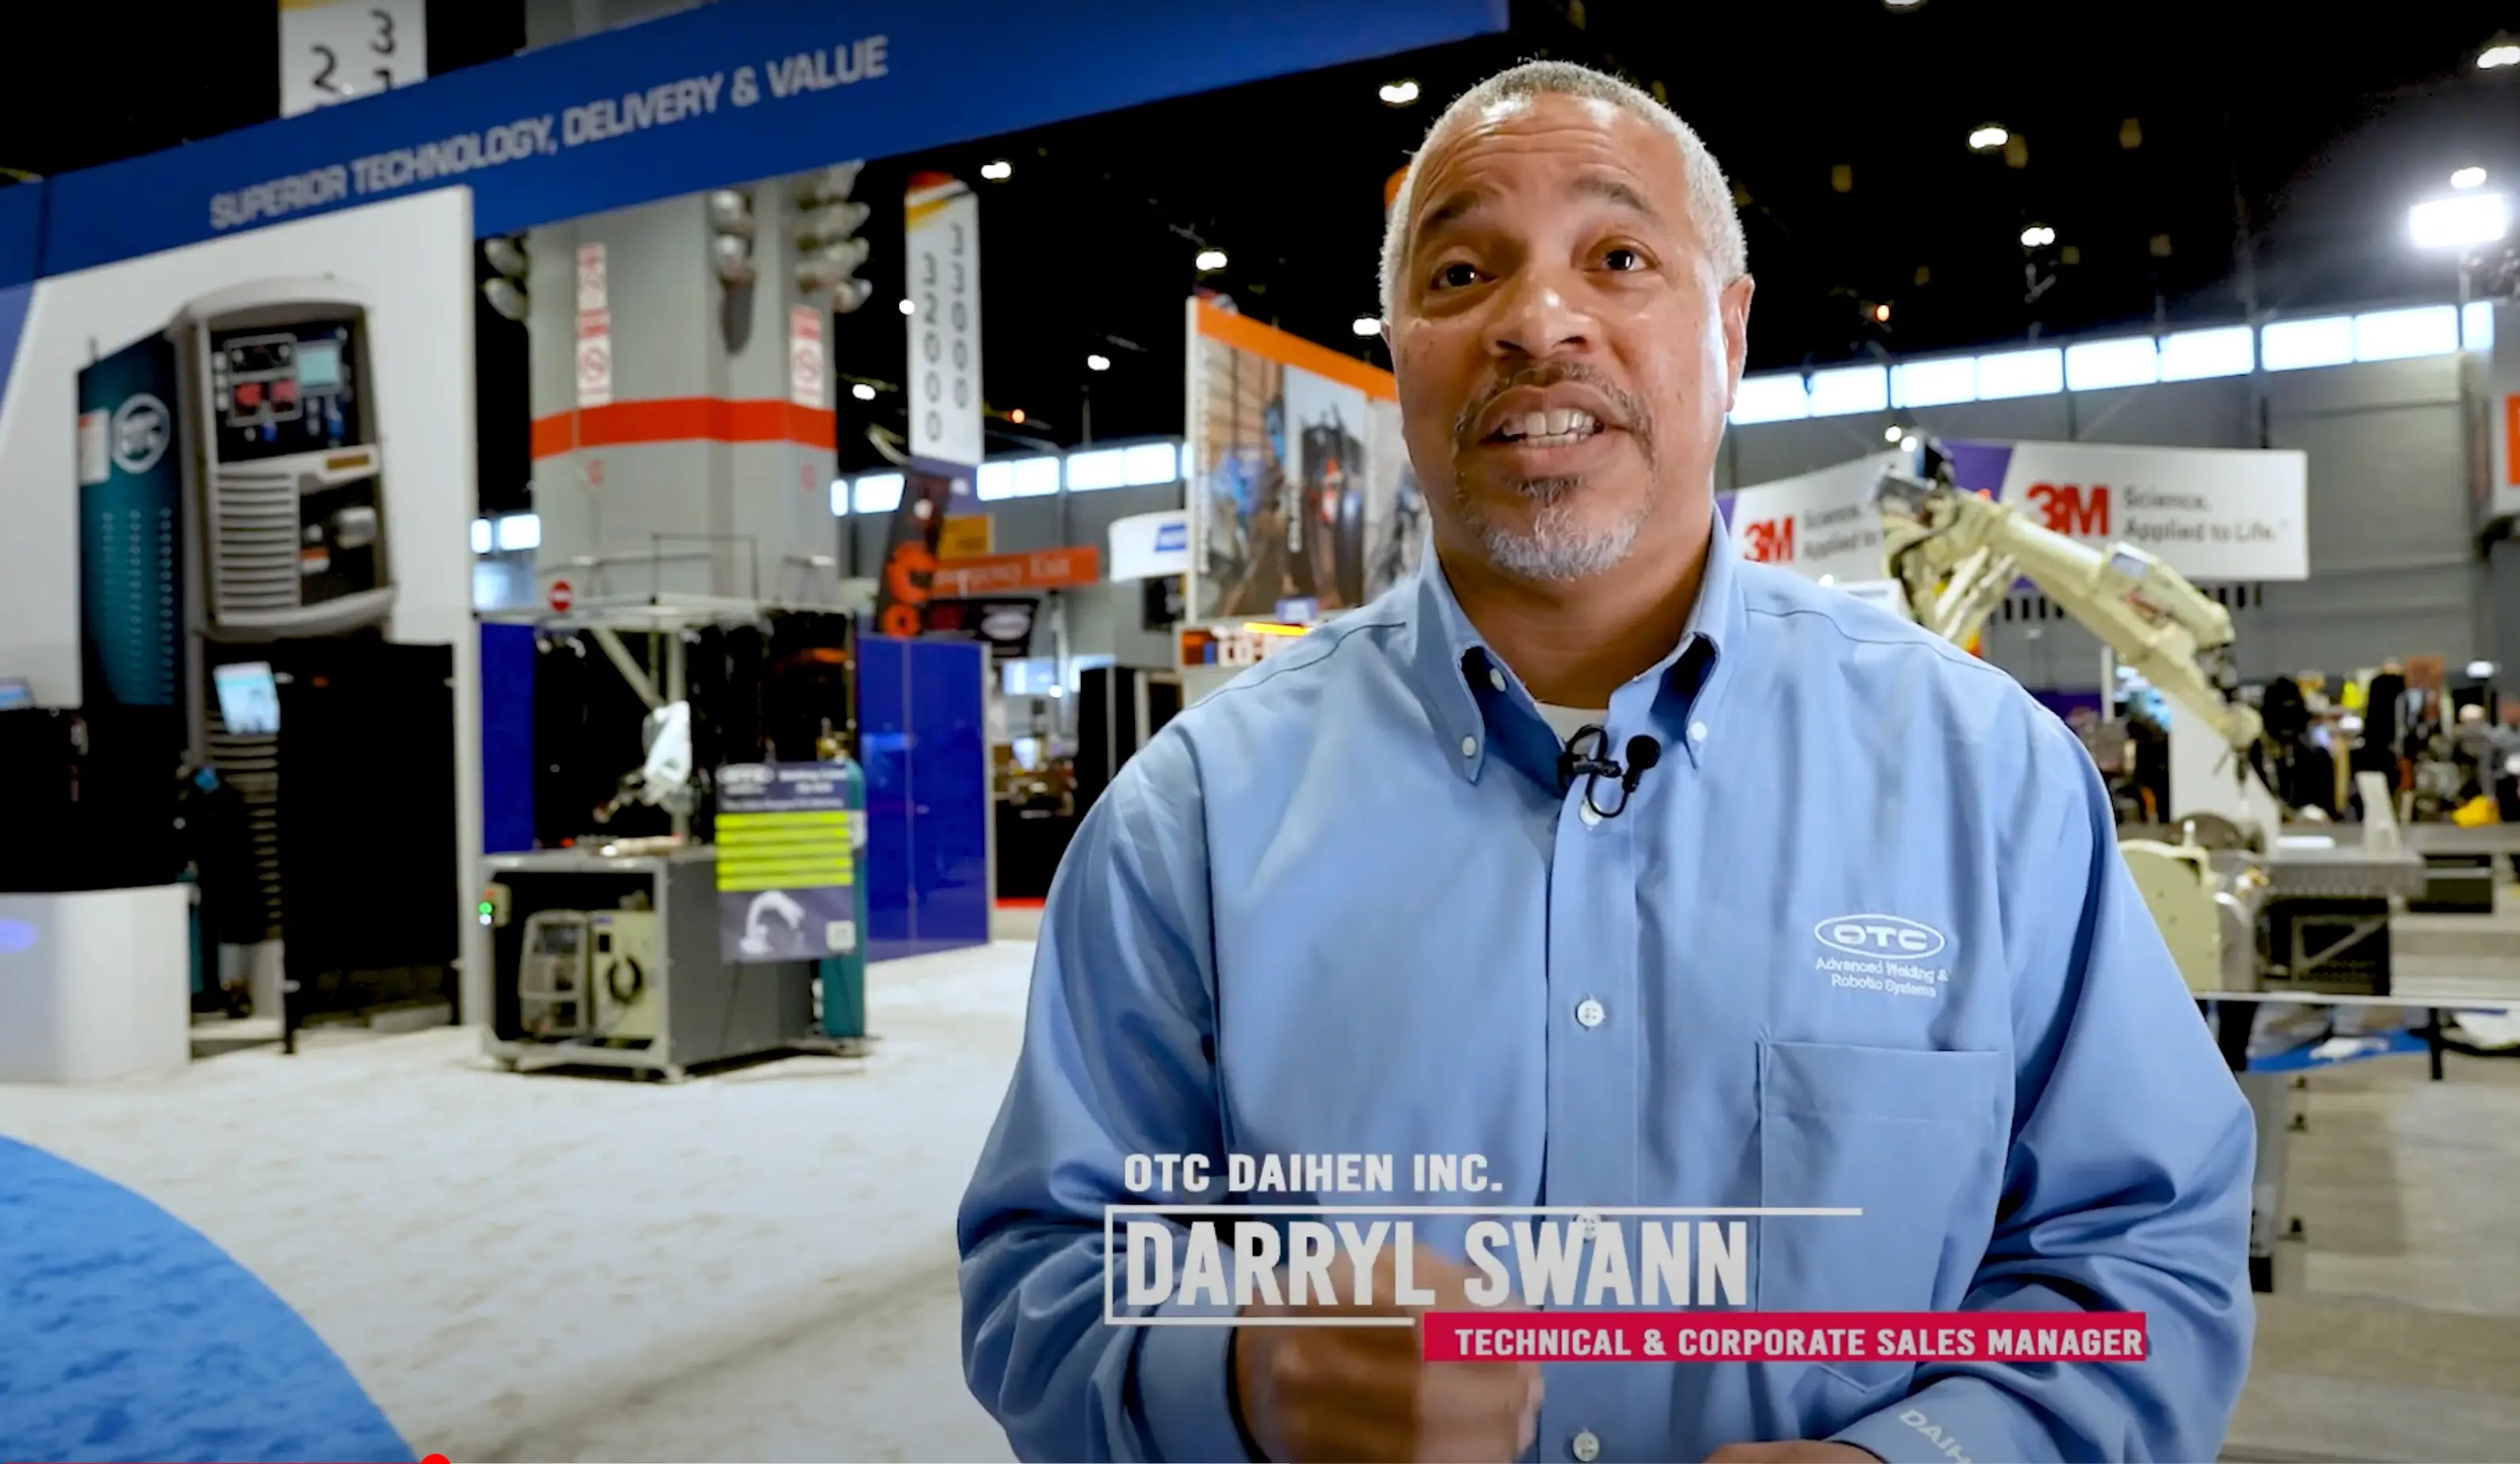 Darryl Swann, Technical and Corporate Sales Manager